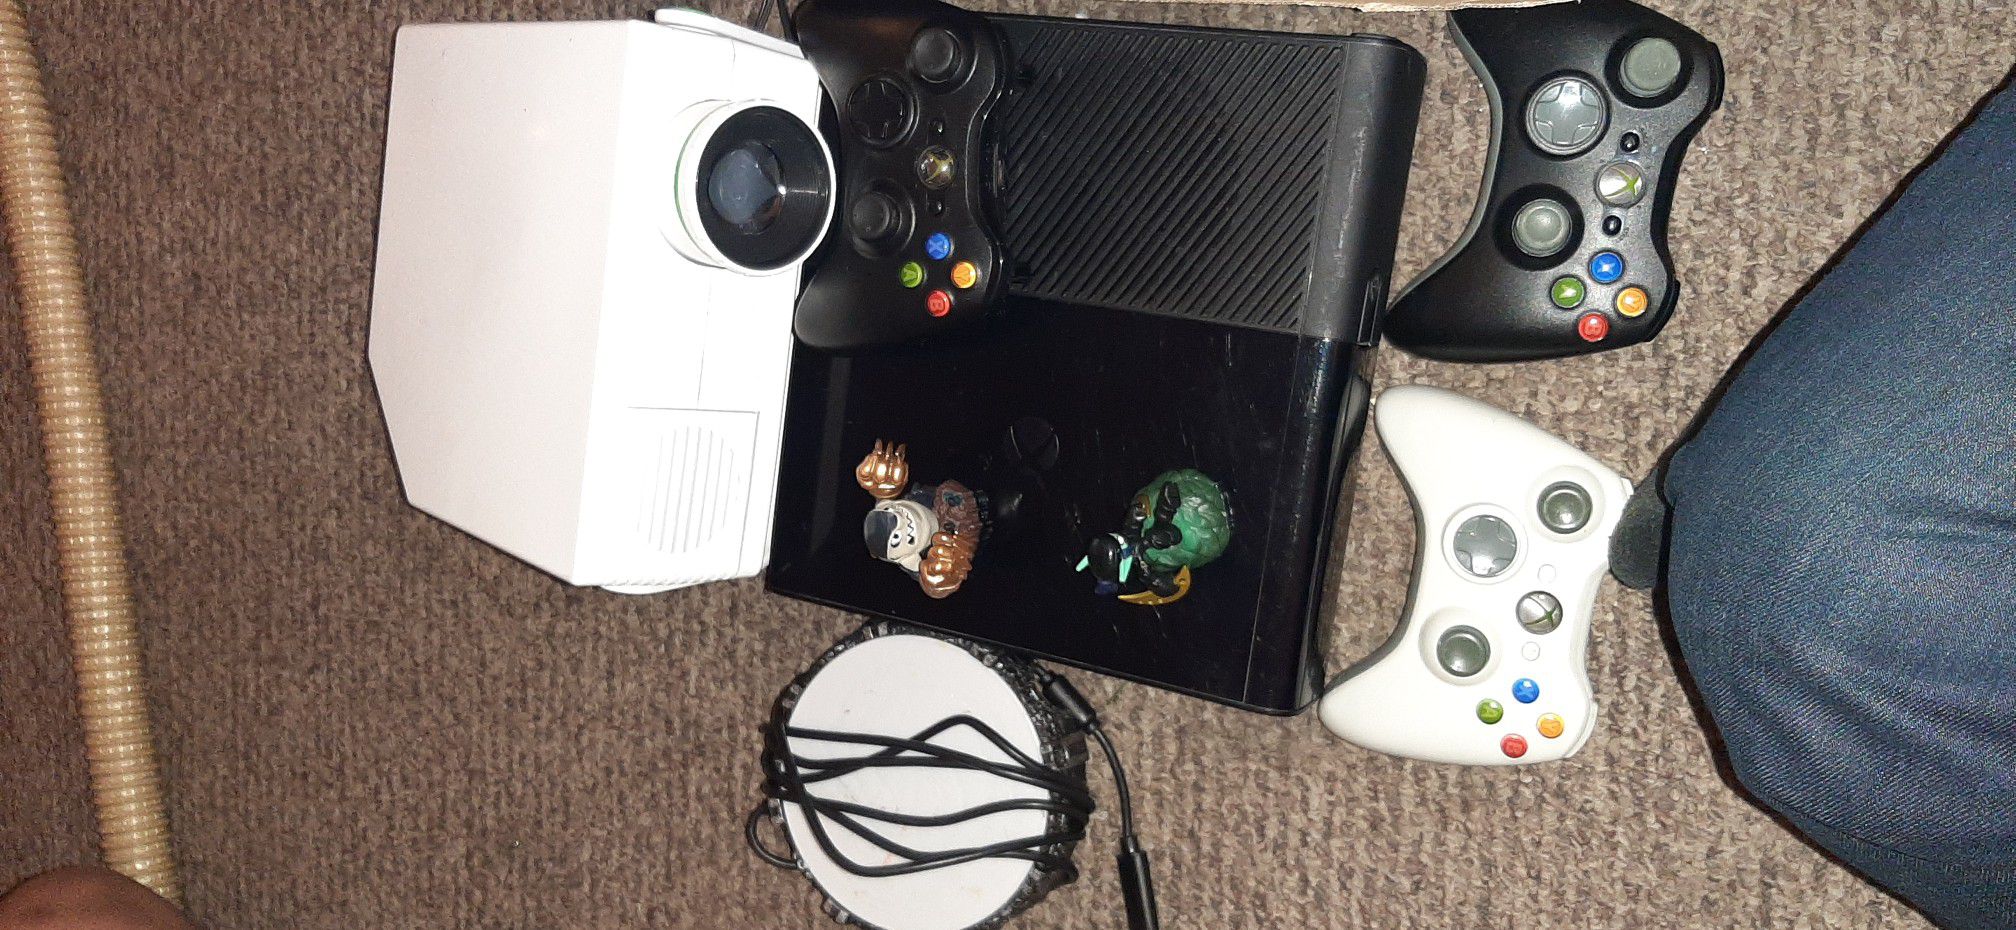 Xbox 360, 3 controller, projector, 10 game